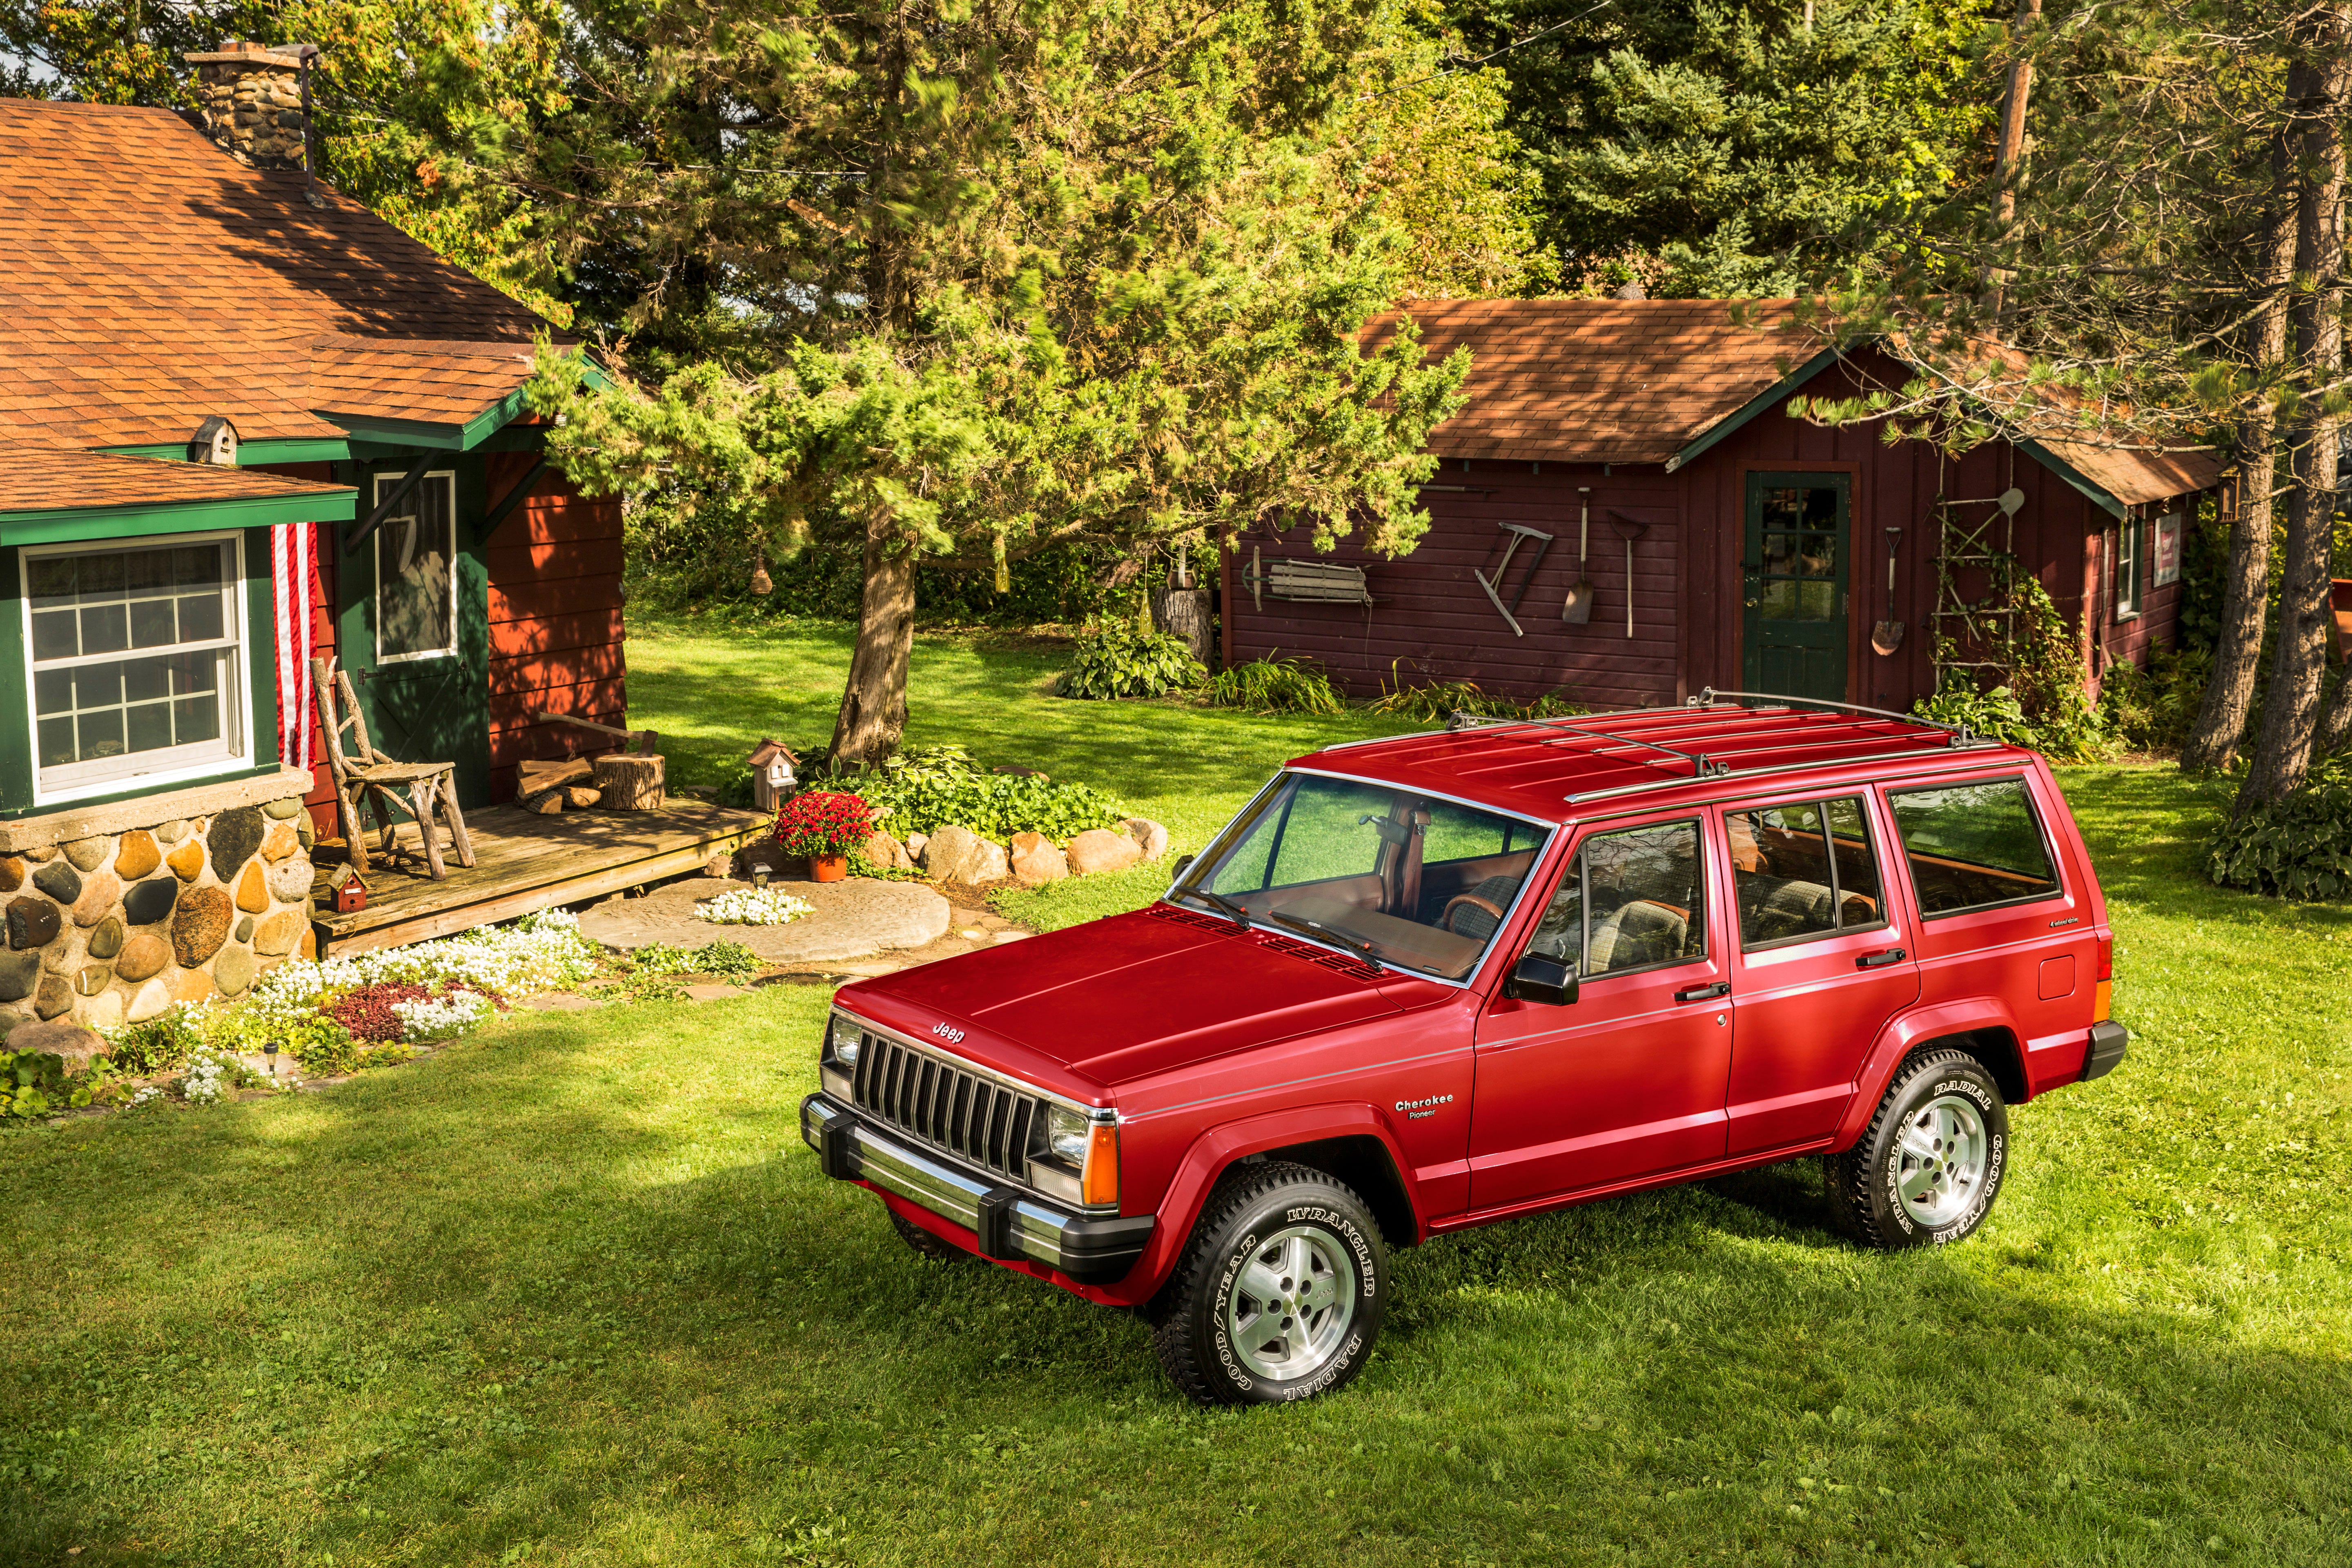 1984-2001 Jeep Cherokee (XJ): AMC's first Jeep design from scratch, and the first all-new Jeep wagon since the Wagoneer, was the Cherokee, or XJ series. The XJs used a hybrid of frame and uni-body construction, a new 'Quadra-Link' front suspension to retain the durability of a solid front axle while improving handling and ride, and robotic assembly to improve fit and finish. A half-ton lighter than the old Cherokee, 4 inches lower (10 cm), 6 inches (15 cm) narrower and an incredible 21 (53 cm) inches shorter, the XJs had 90 percent of the old Cherokee's capacity. Available with two 2WD/4WD systems, SelecTrac and shift-on-the-fly CommandTrac and four doors. Cherokee dominated its market segment for years. Cherokee Limited debuted in 1988 and a 4.0-liter I-6 was introduced in 1989.